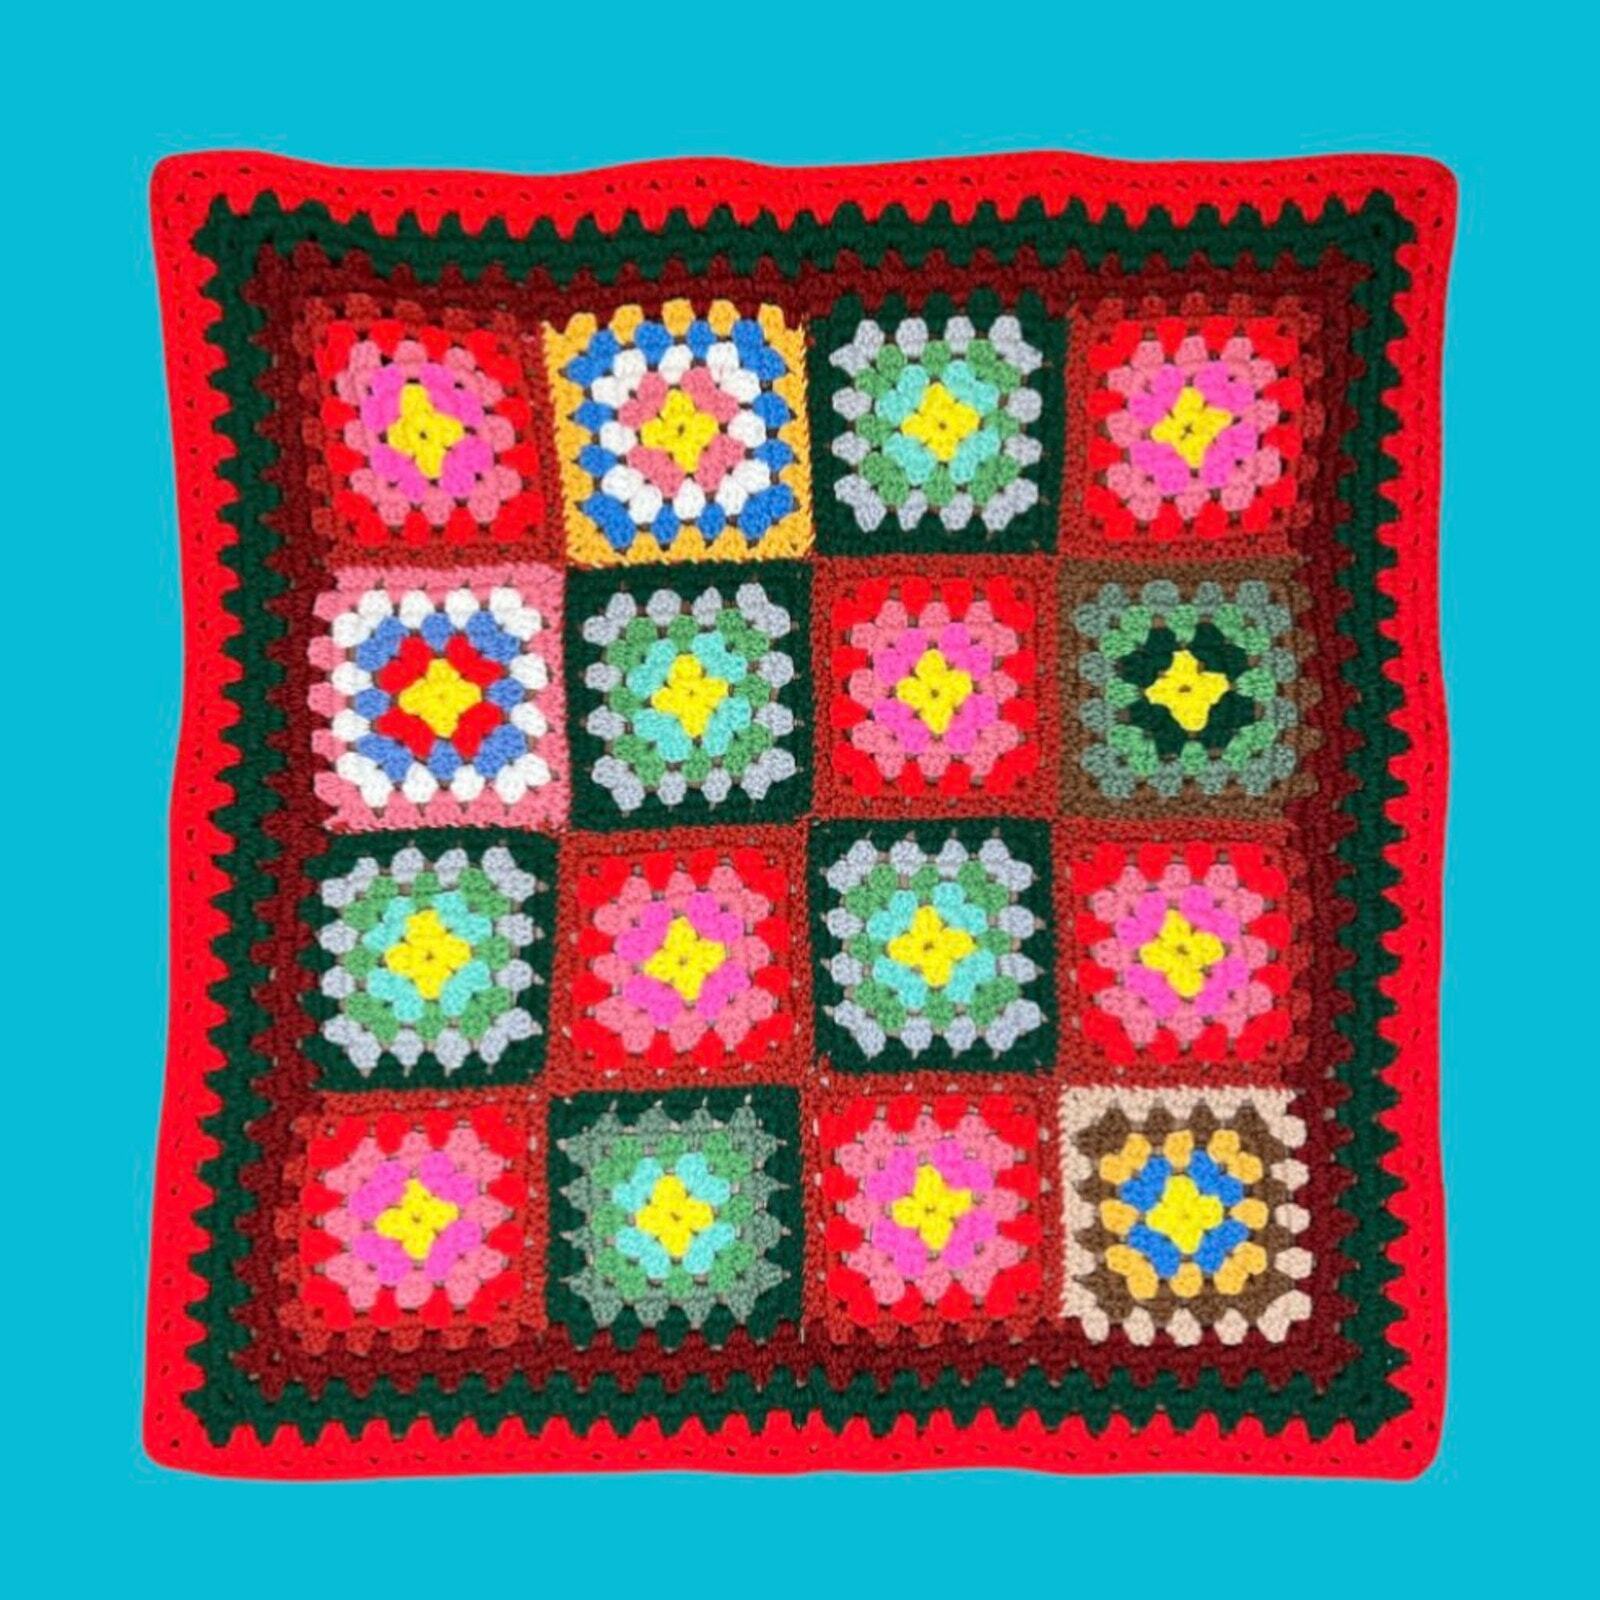 Vintage Multi Red Pink Knit Granny Square Lap Blanket Afghan Throw Shawl 29x27